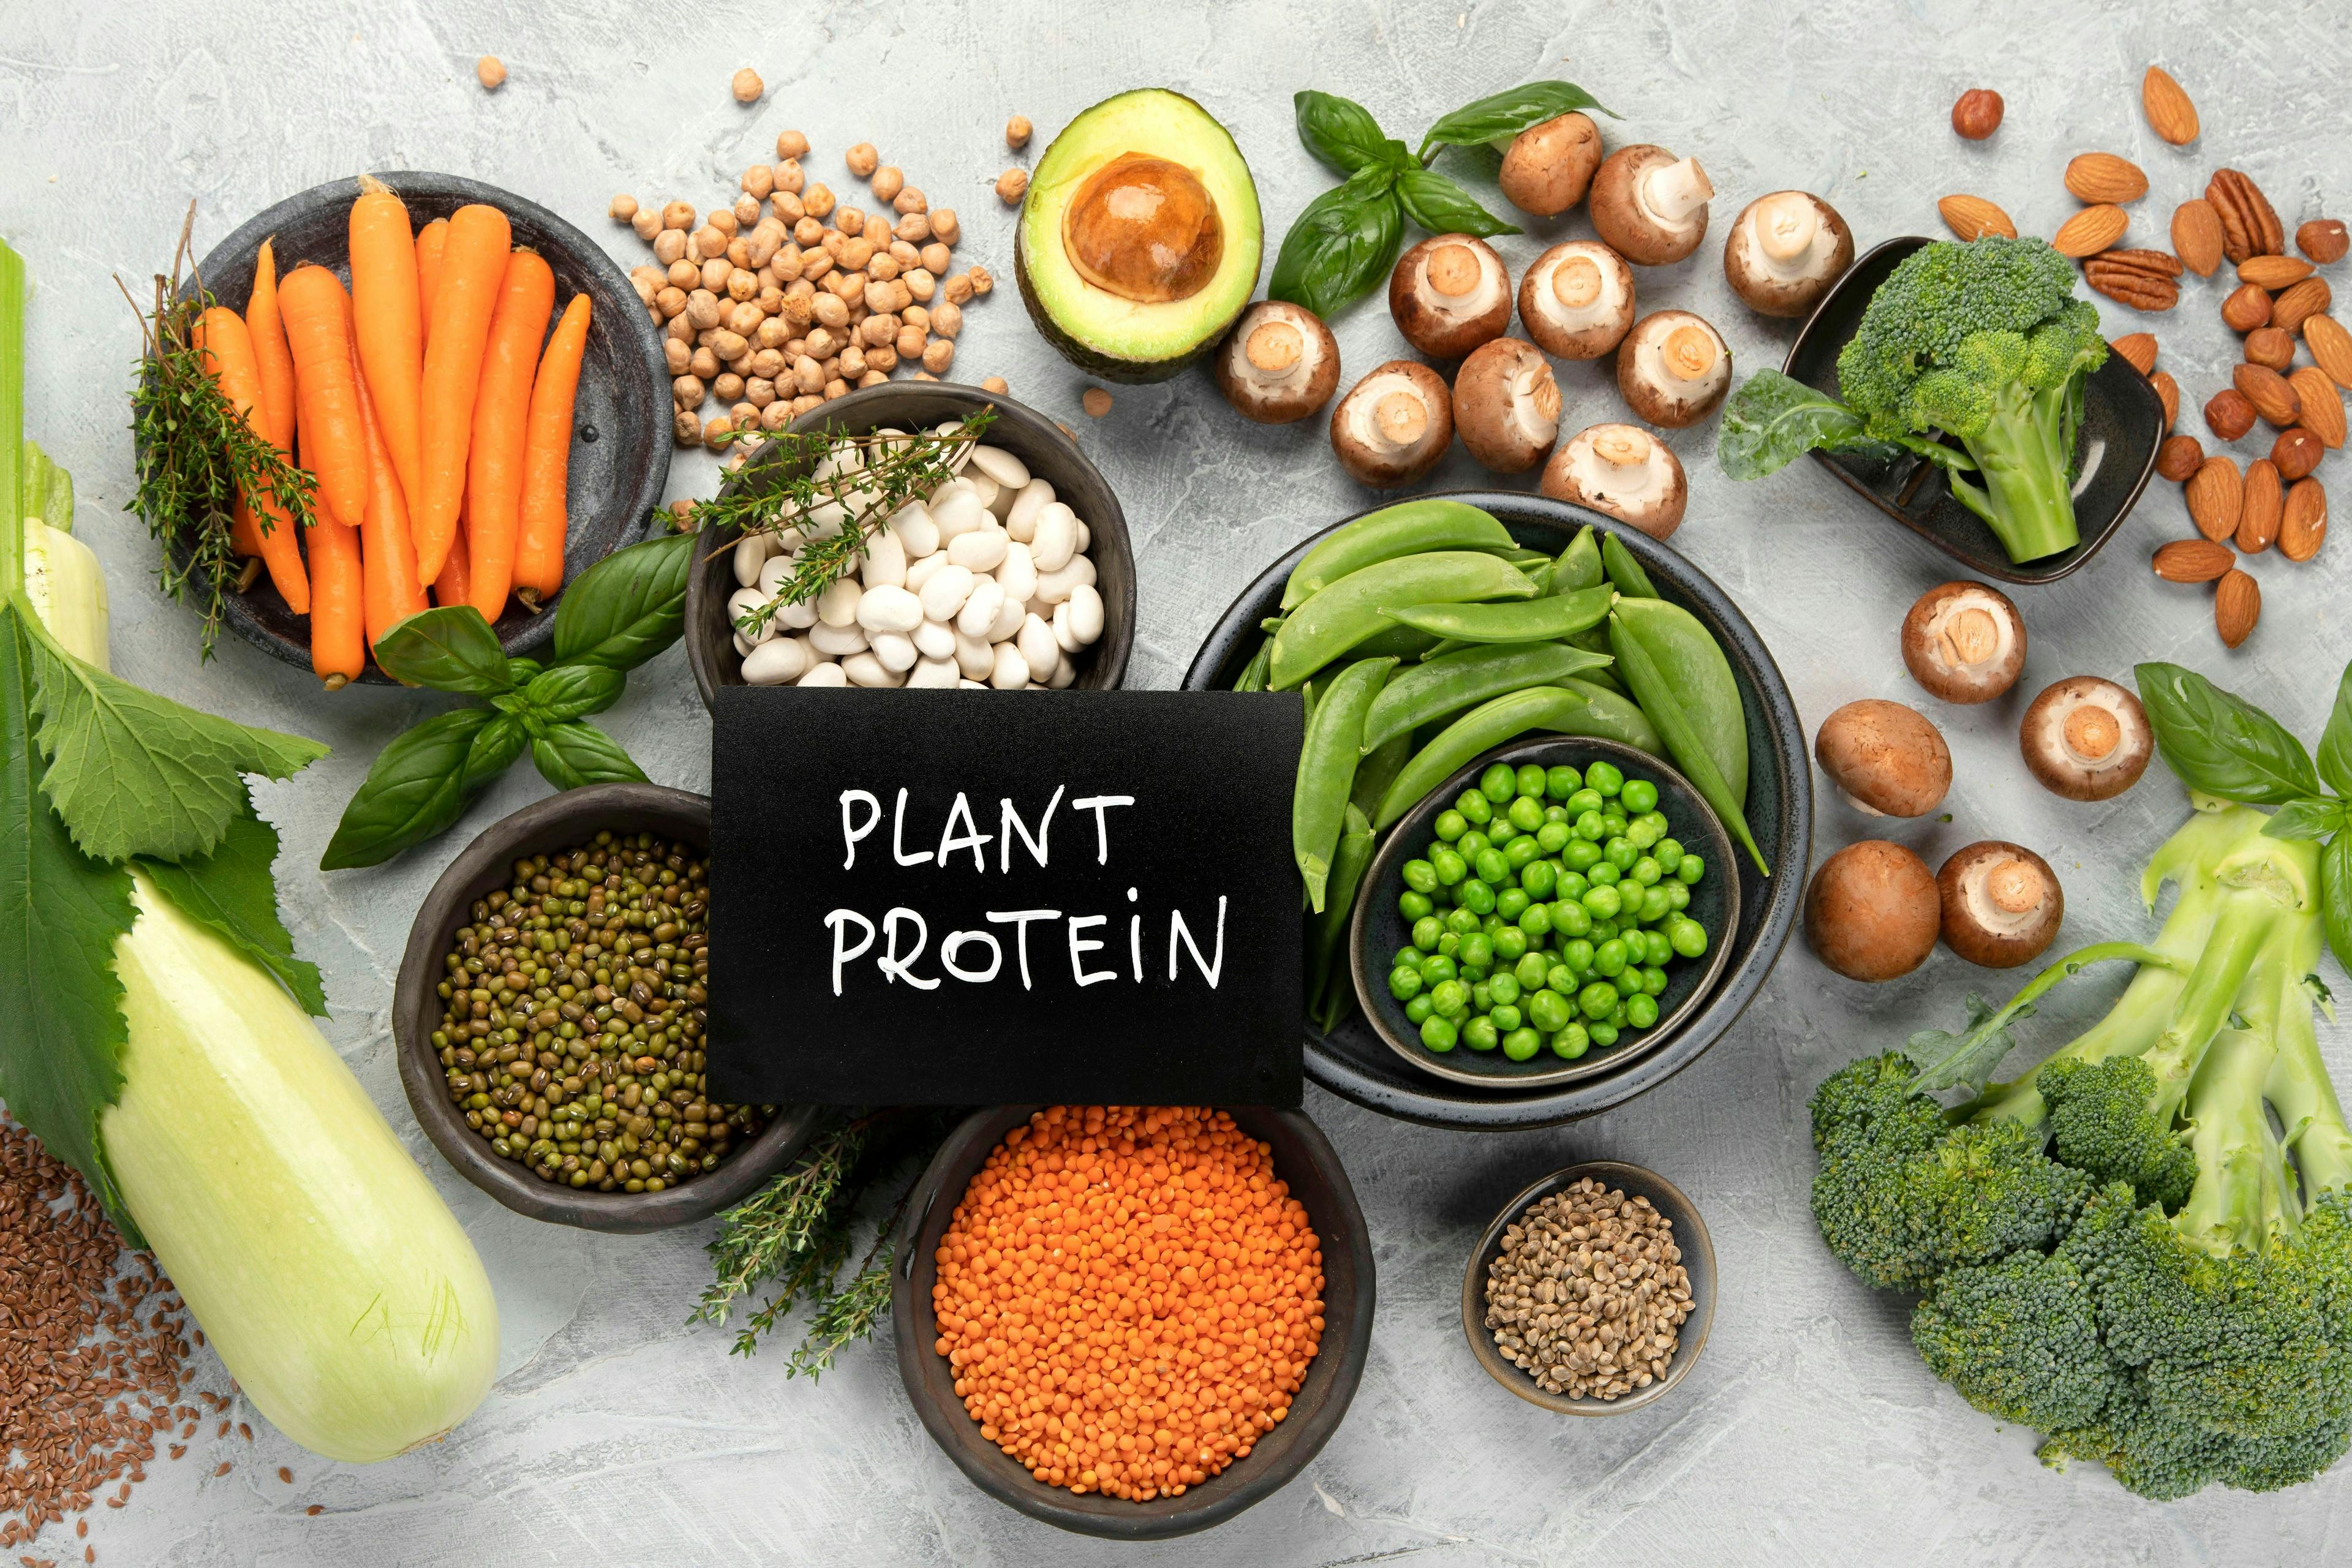 Plant Protein Intake Linked to Disease Prevention, Healthy Aging Among Women